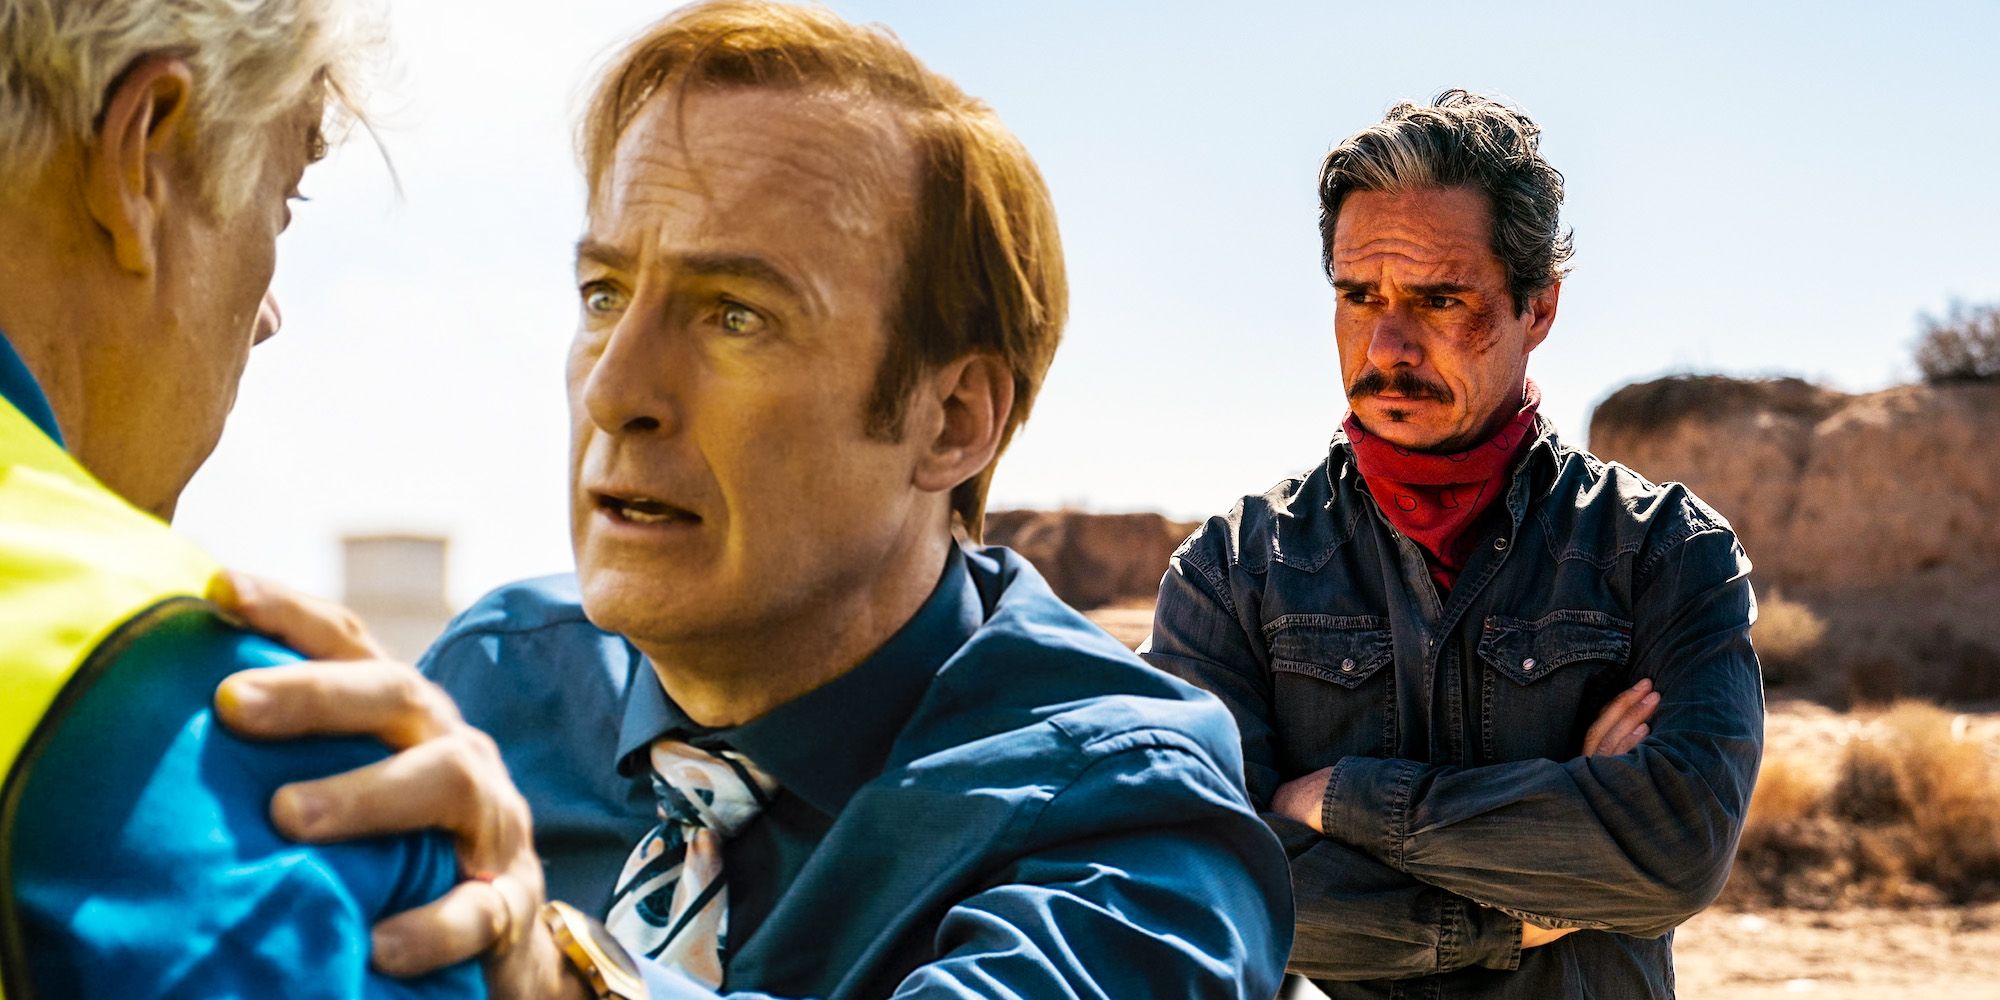 Better call saul why lalo must die